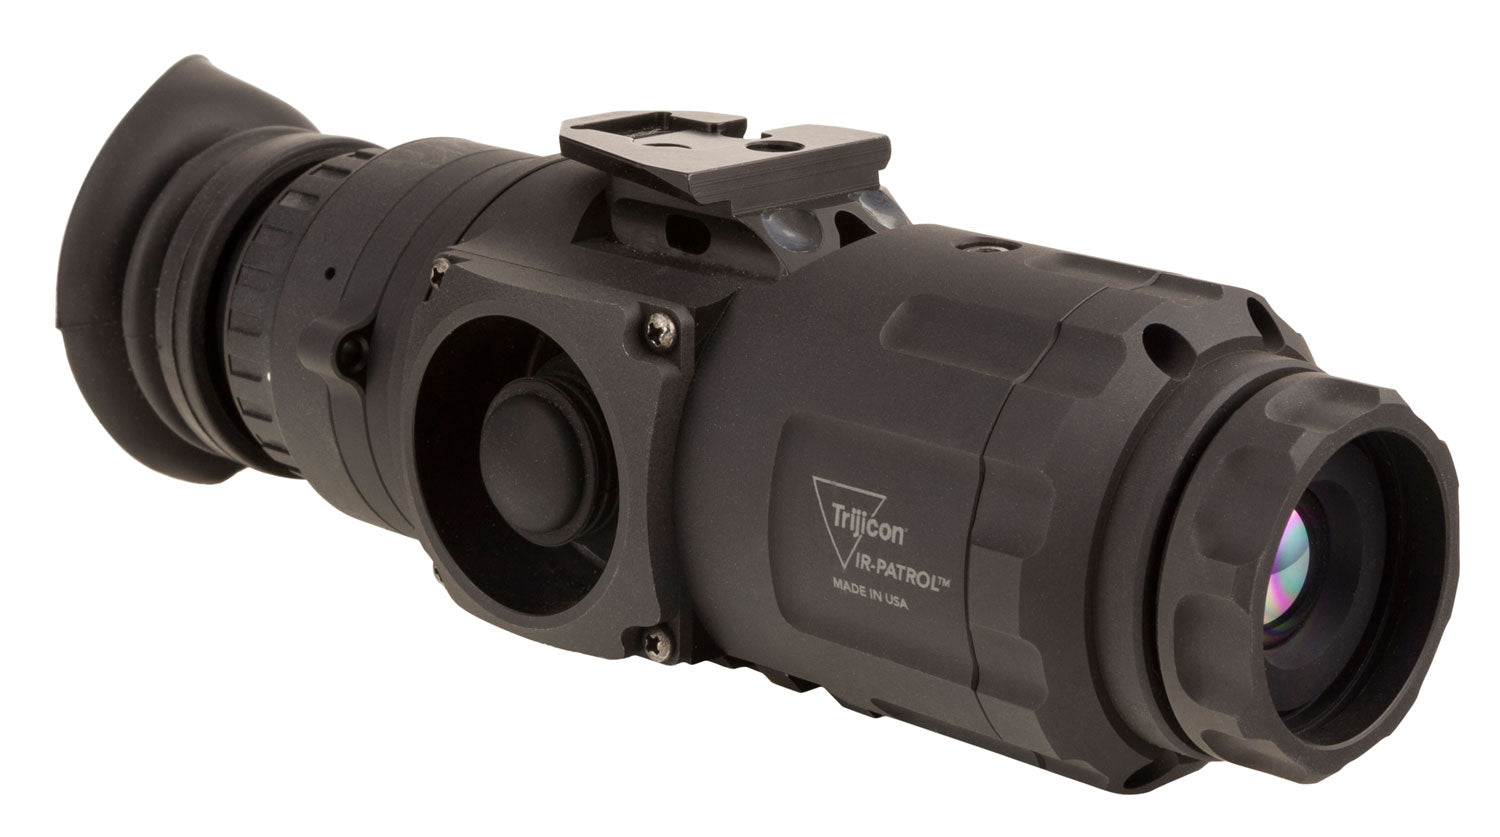 Trijicon EO IRMO300 IR-Patrol M300W Thermal Hand Held/Mountable Scope Black 1x 19mm Multi Reticle Features Wilcox Shoe Interface